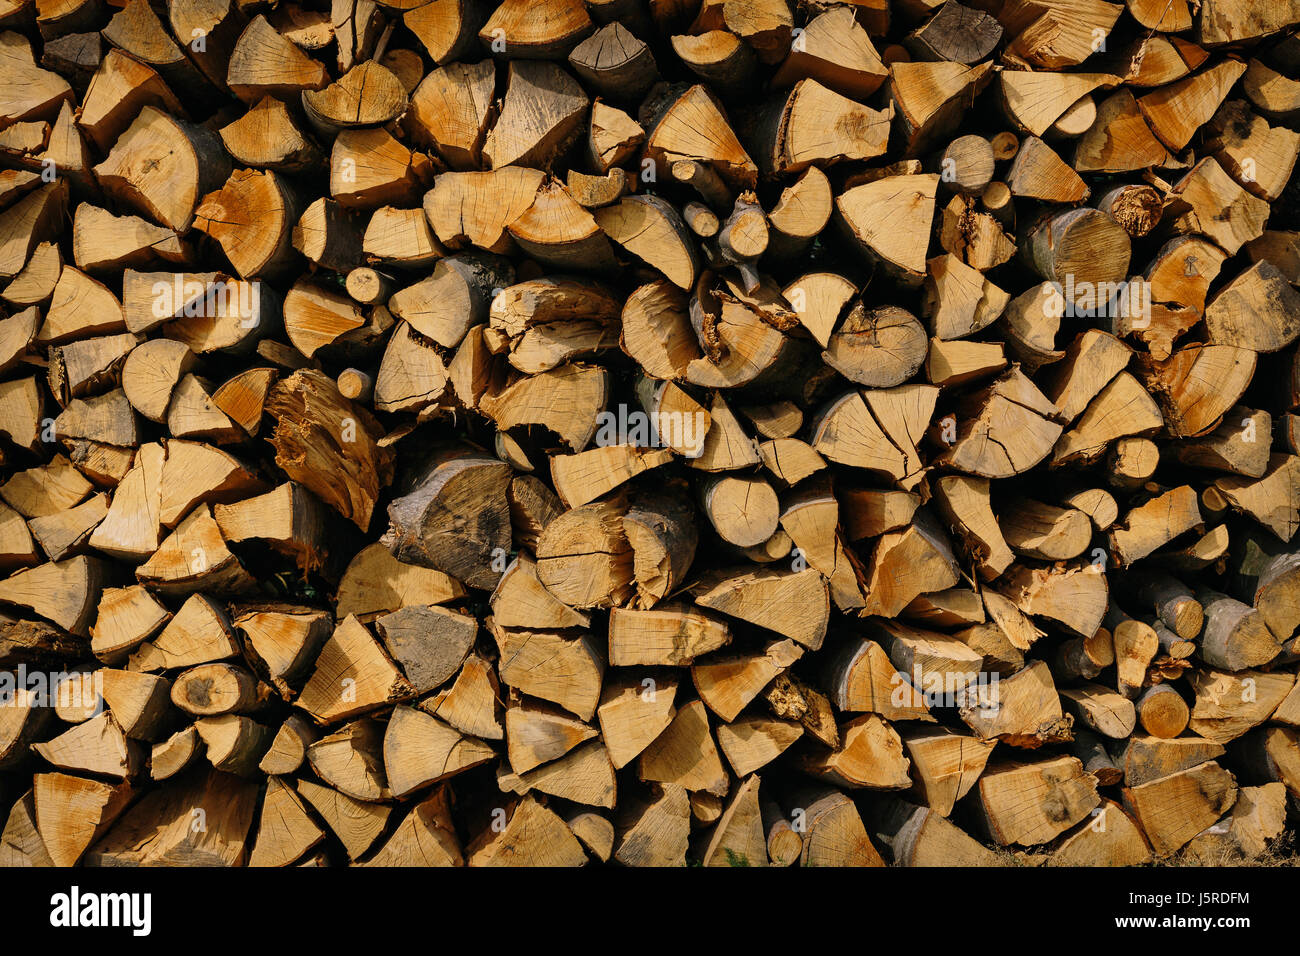 Wood cut in pieces Stock Photo